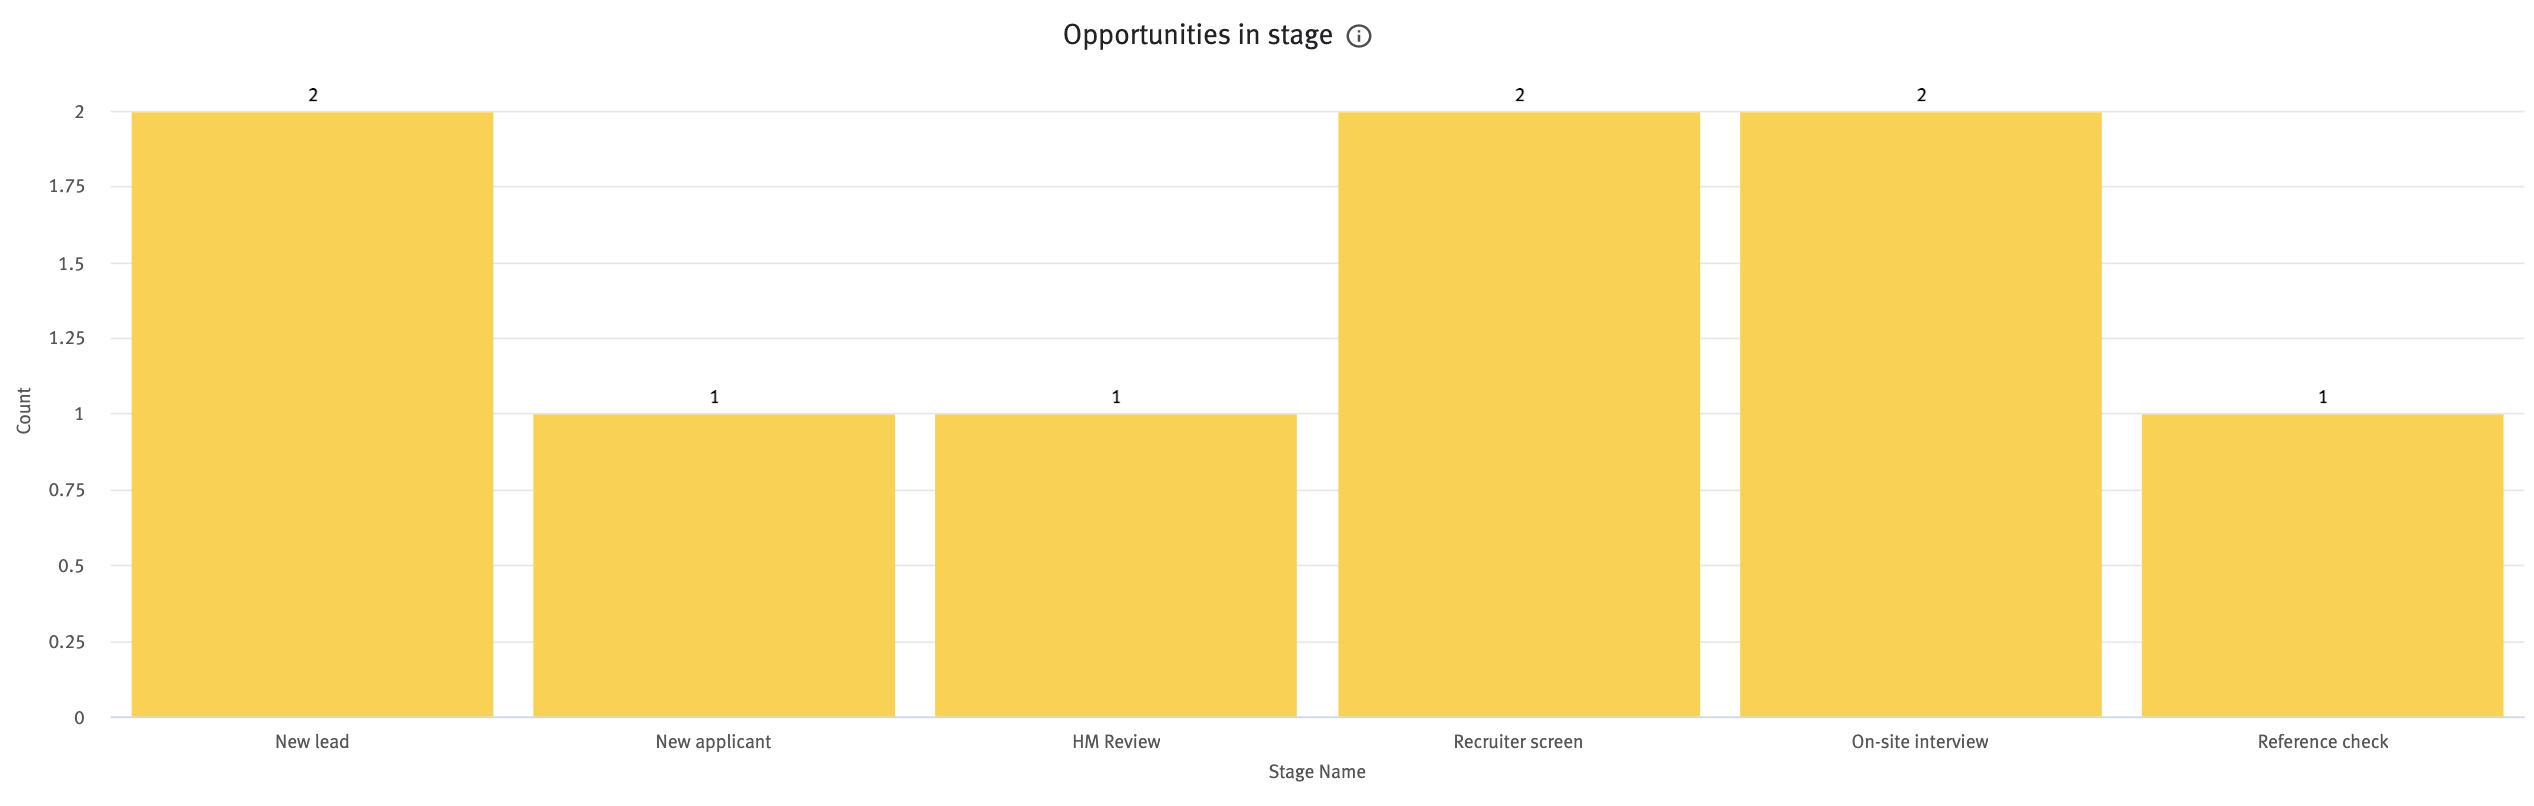 Opportunities in stage chart